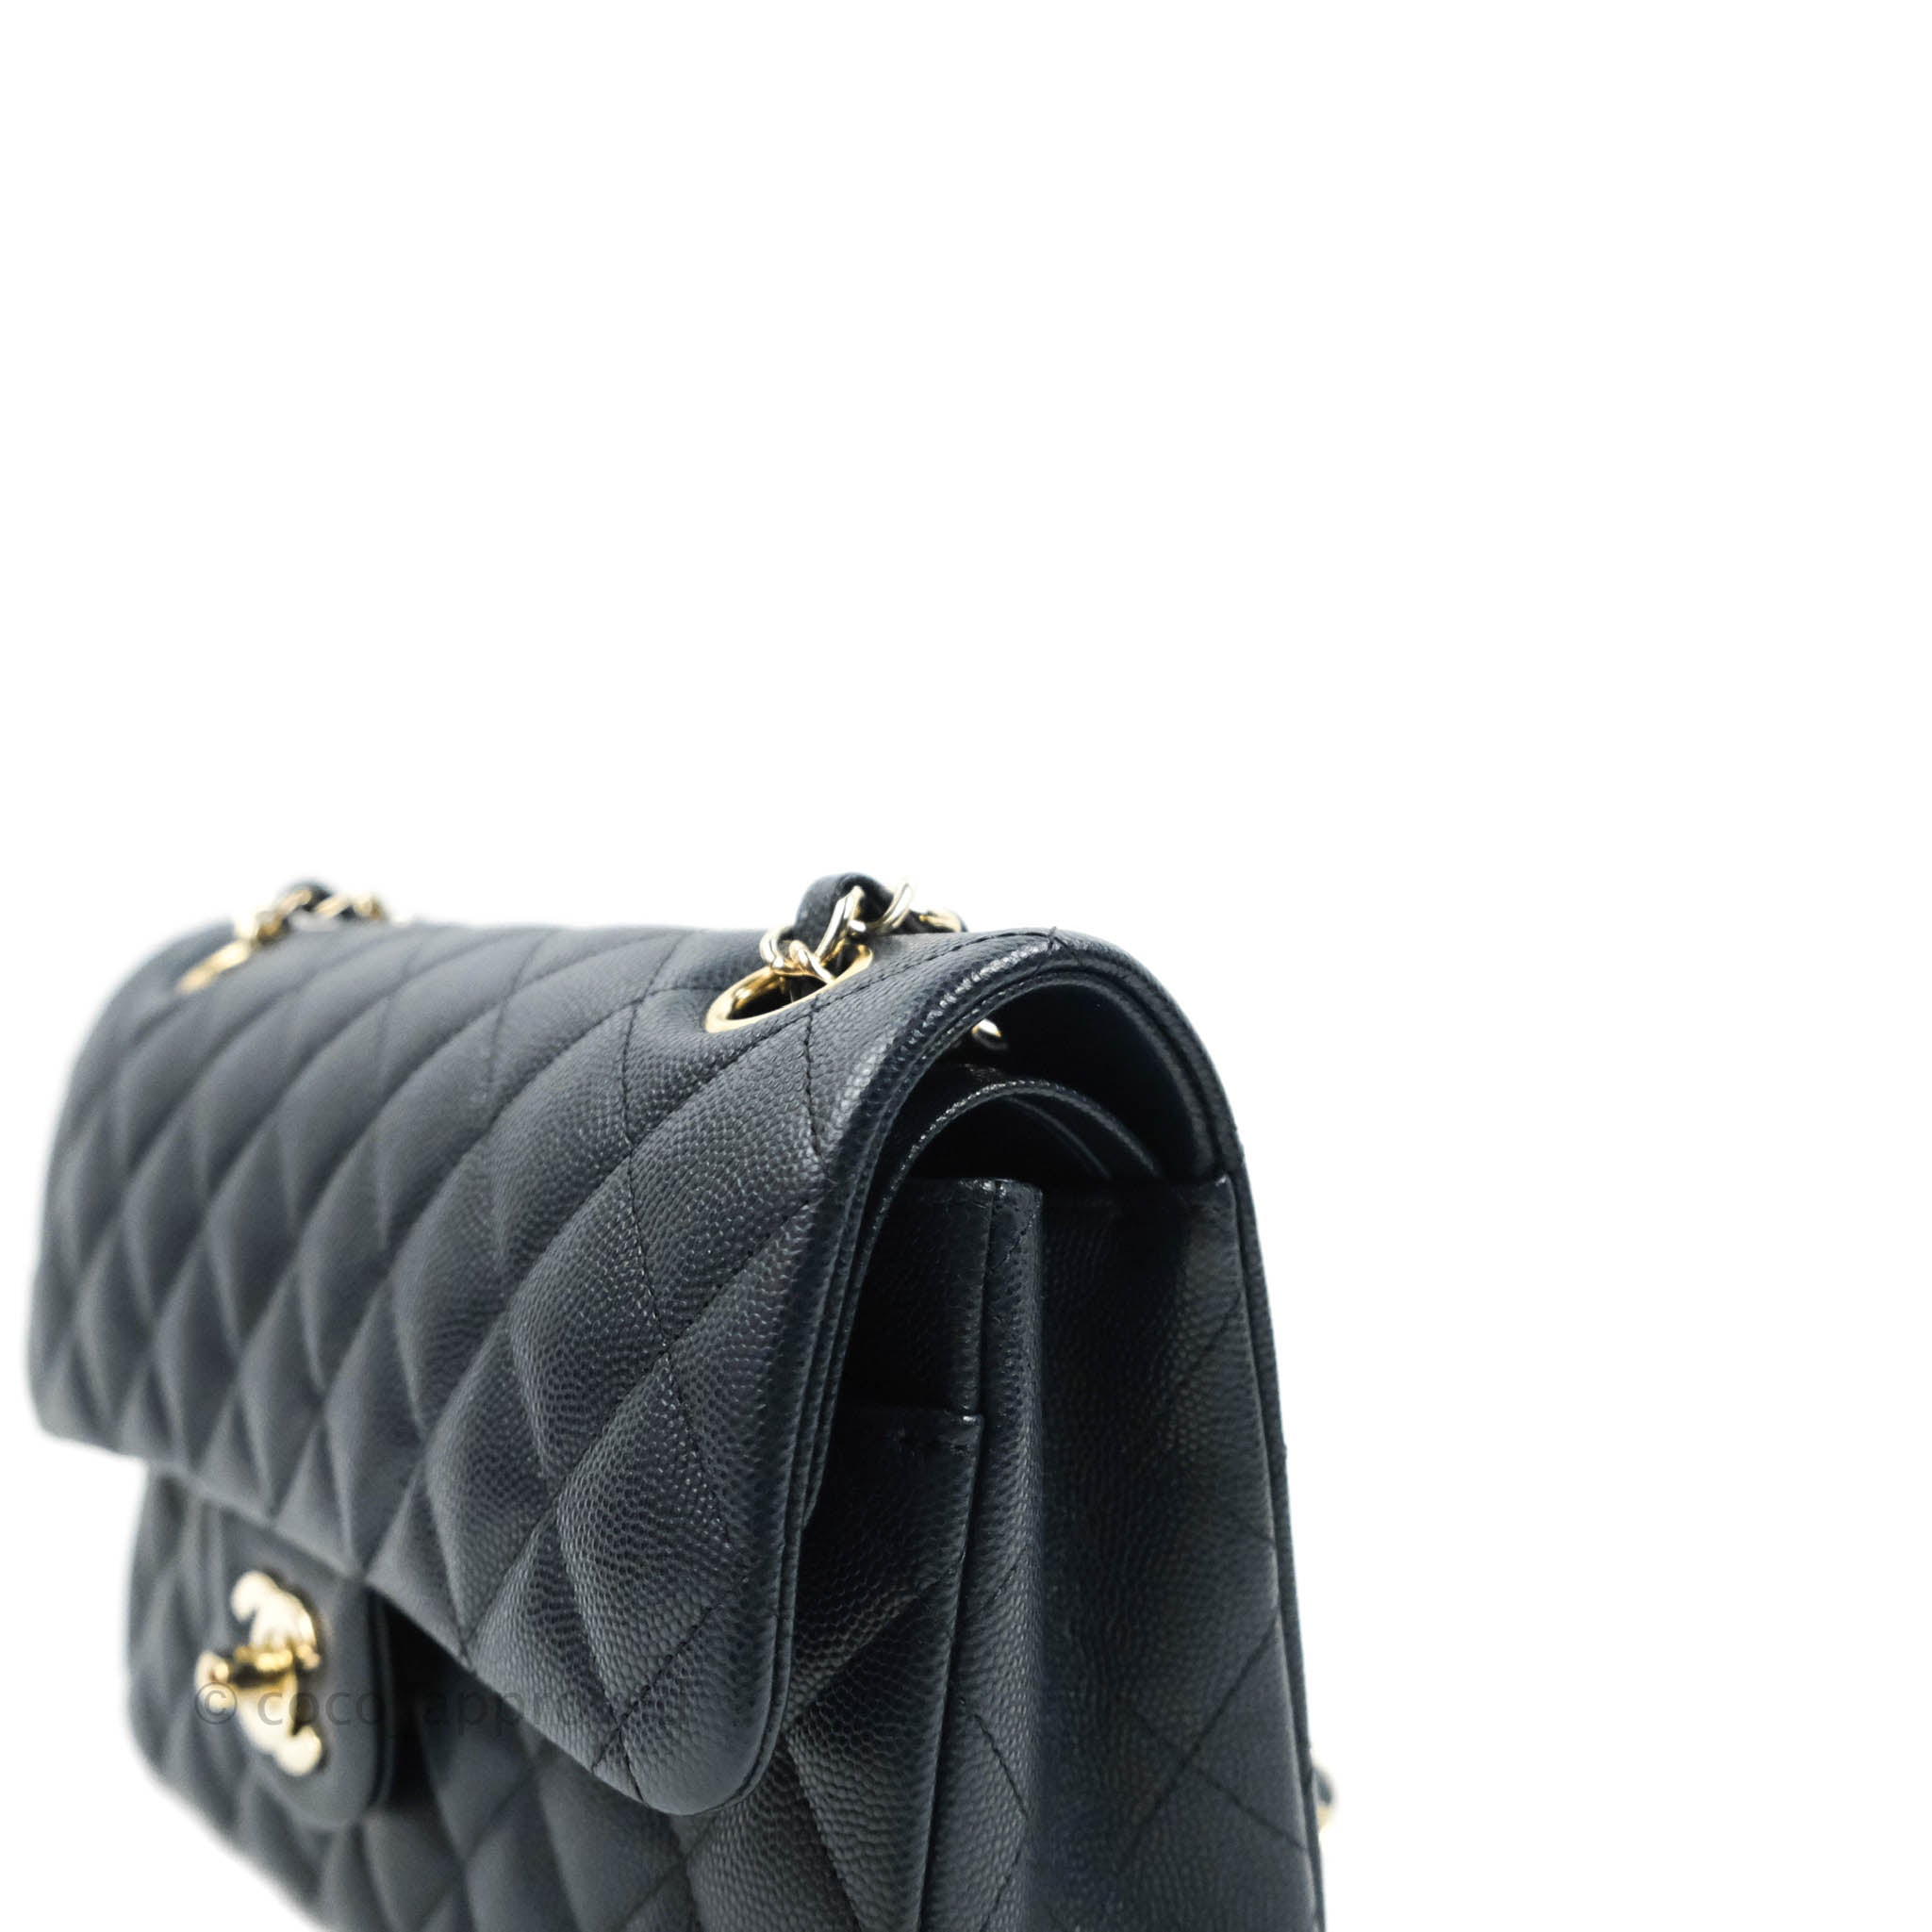 Chanel Coco Vintage Flap Small Bag Black Lambskin Gold Hardware – Coco  Approved Studio